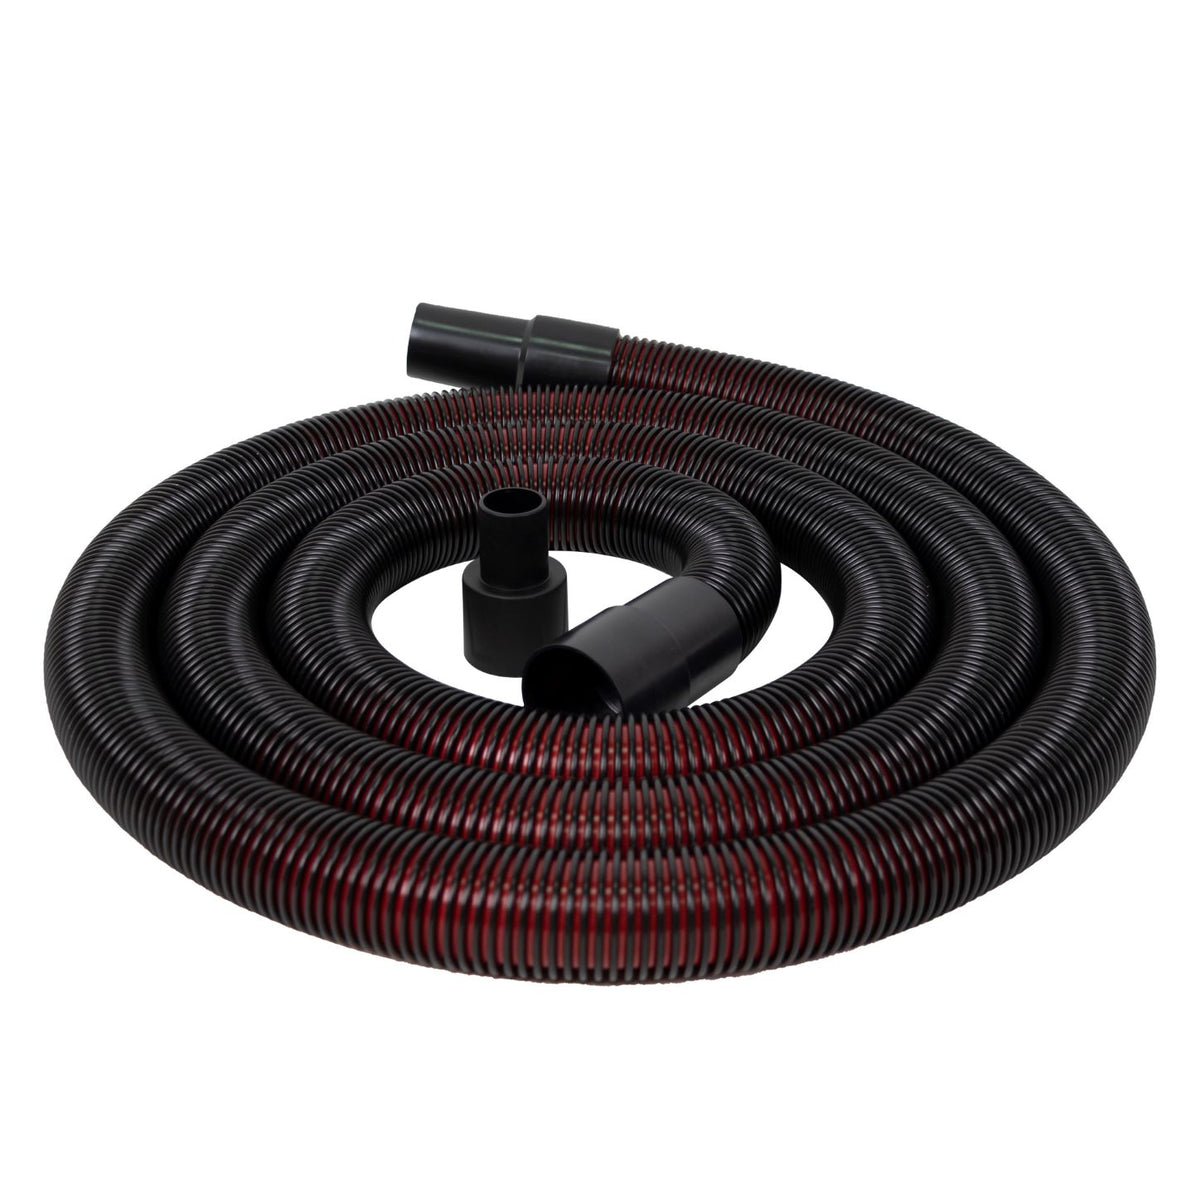 STEALTH 1-7/8-IN X 12-FT HOSE w/adapter